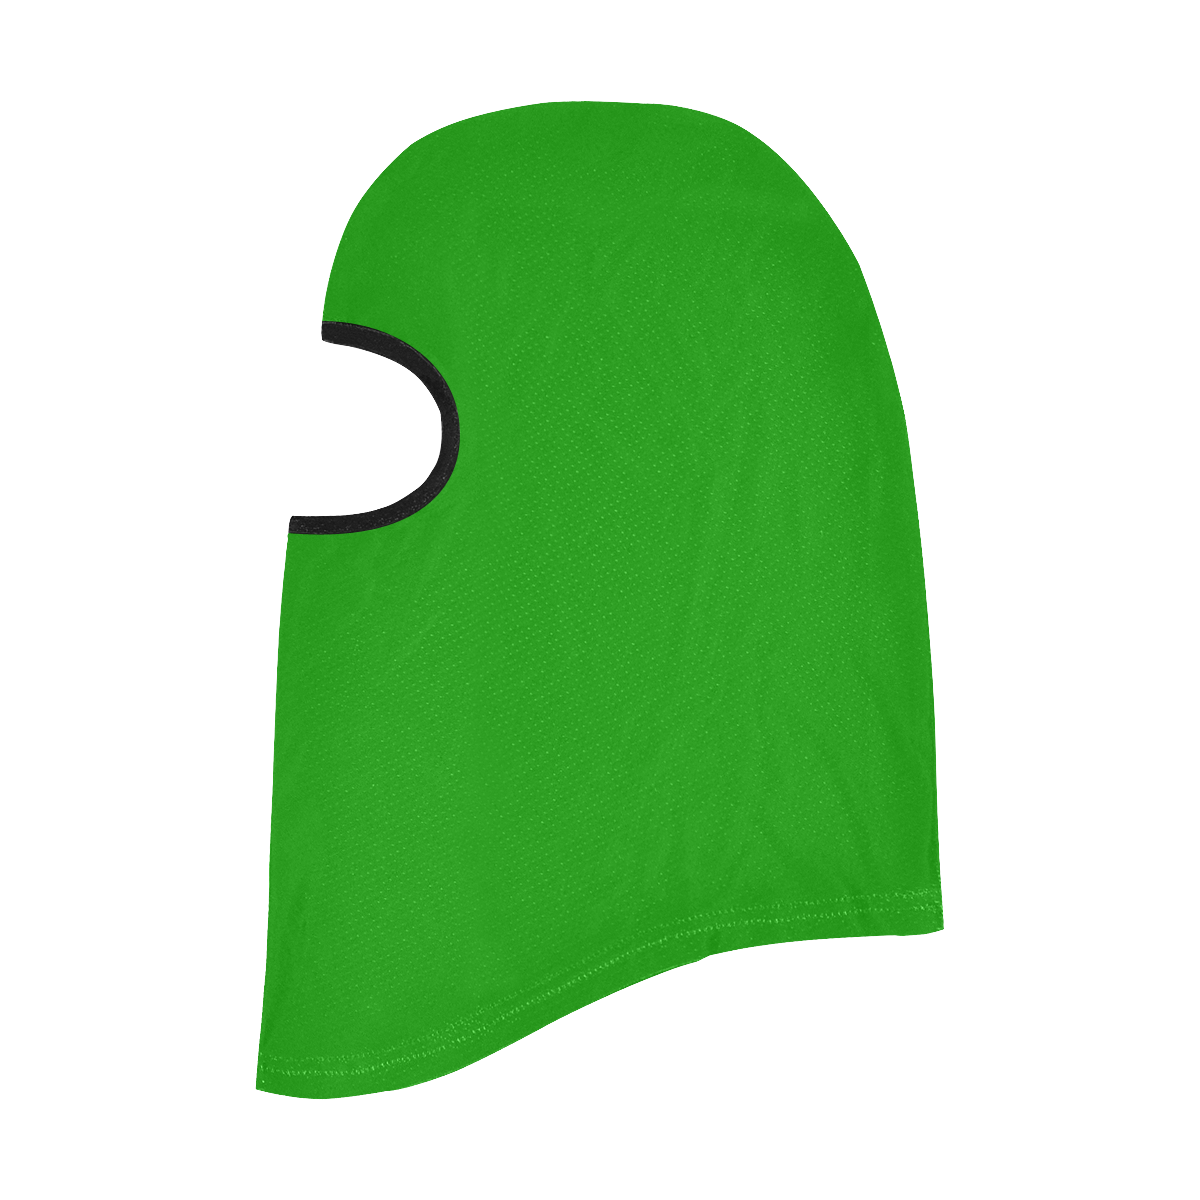 Motorcycle Face Mask green All Over Print Balaclava